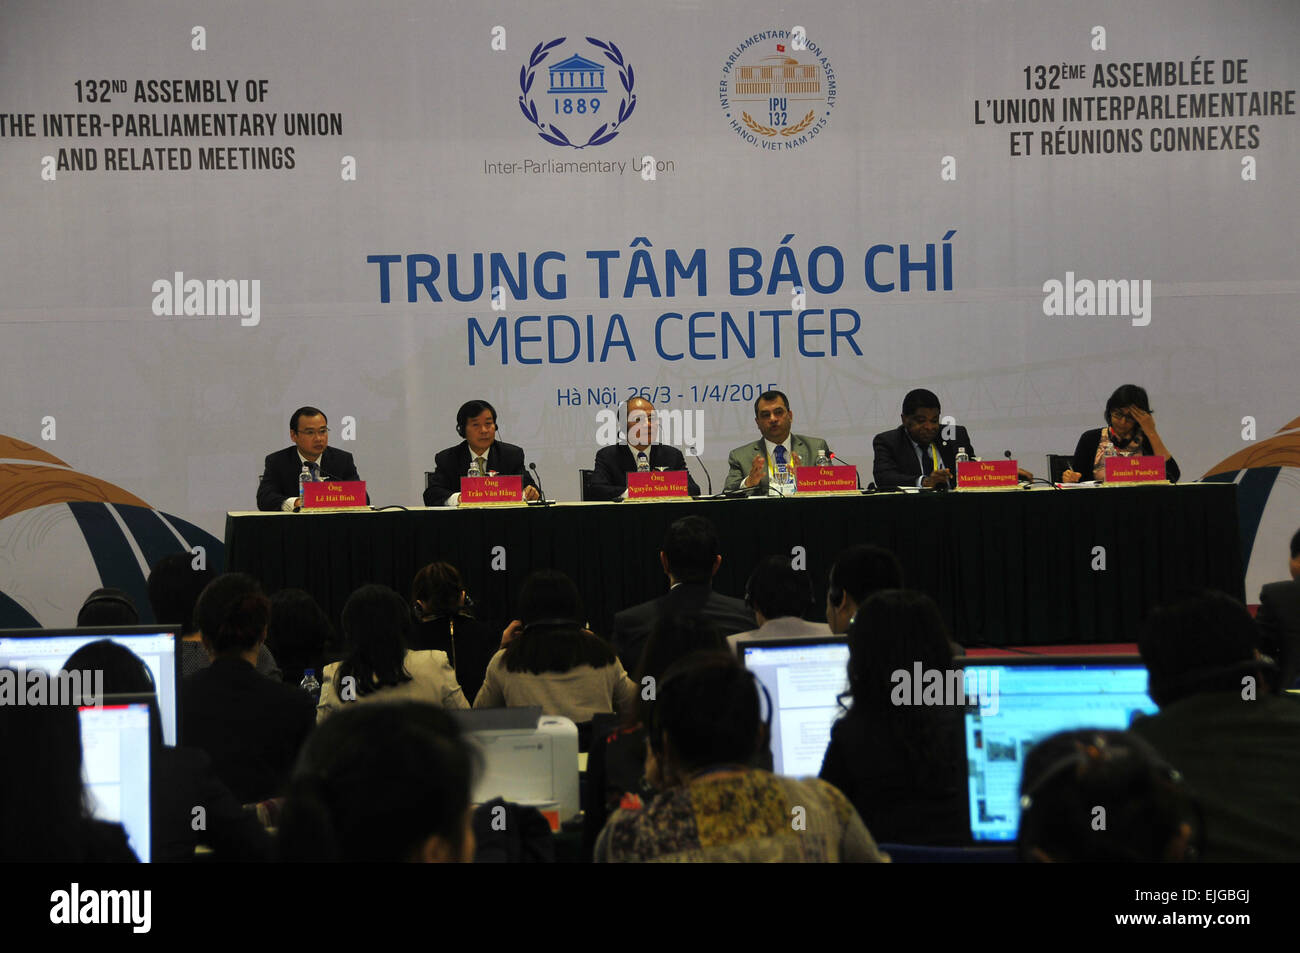 Hanoi. 26th Mar, 2015. Photo taken on March 26, 2015 shows the scene of a press conference of the 132nd Assembly of the Inter-Parliamentary Union (IPU) in Hanoi, Vietnam. Vietnam is ready for the 132nd Assembly of IPU and will try its best to ensure success of the important diplomatic event, said Nguyen Sinh Hung, Vietnam's National Assembly (NA) chairman, here Thursday. © Zhang Jianhua/Xinhua/Alamy Live News Stock Photo